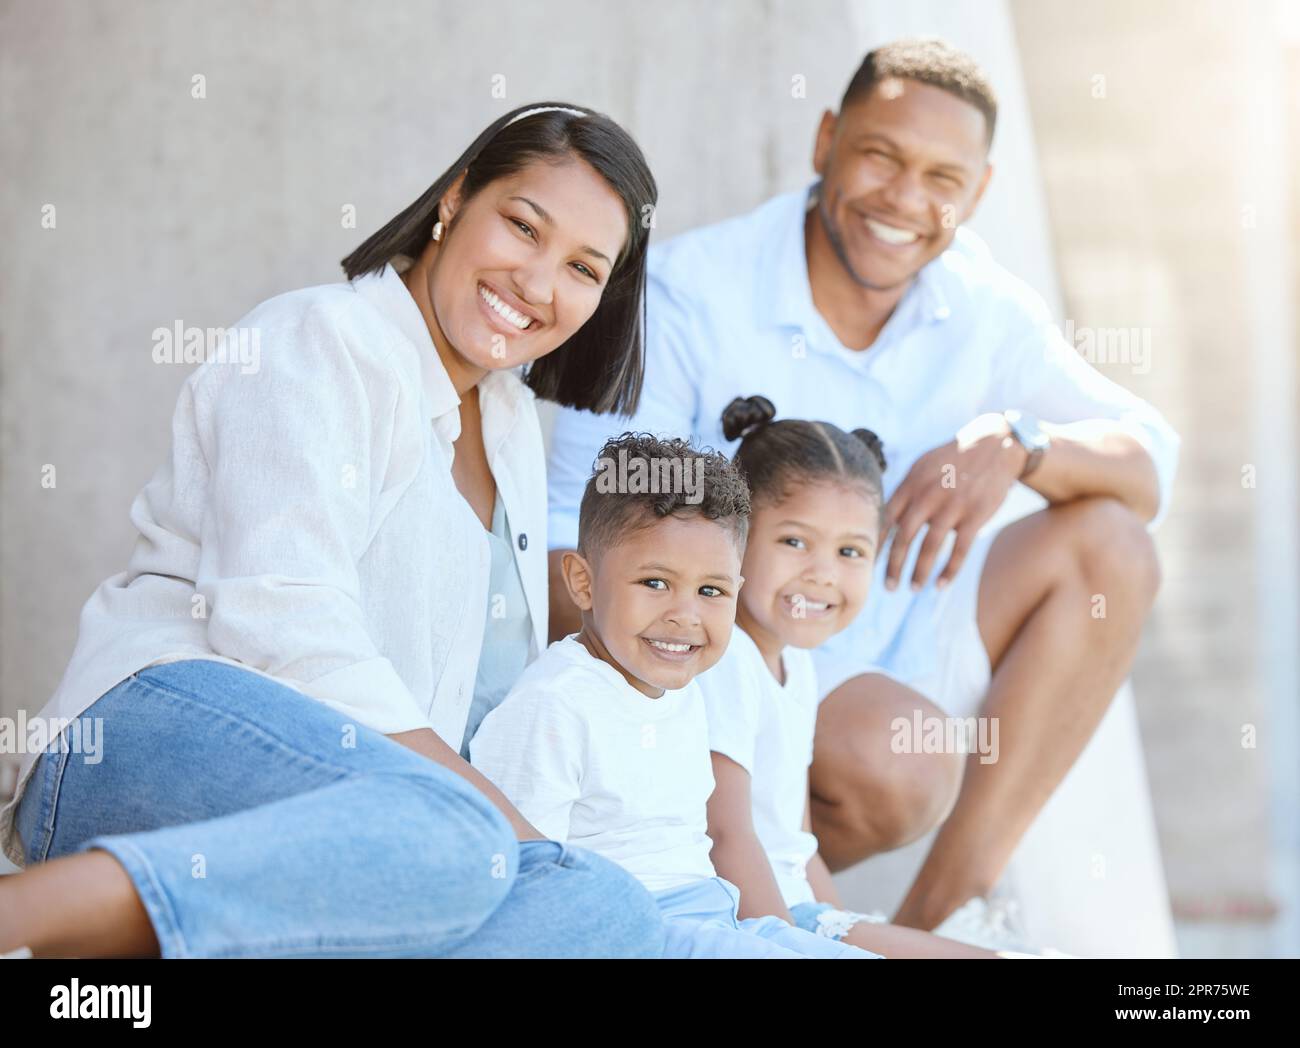 Getting back to basics. Shot of a beautiful young family bonding outside. Stock Photo